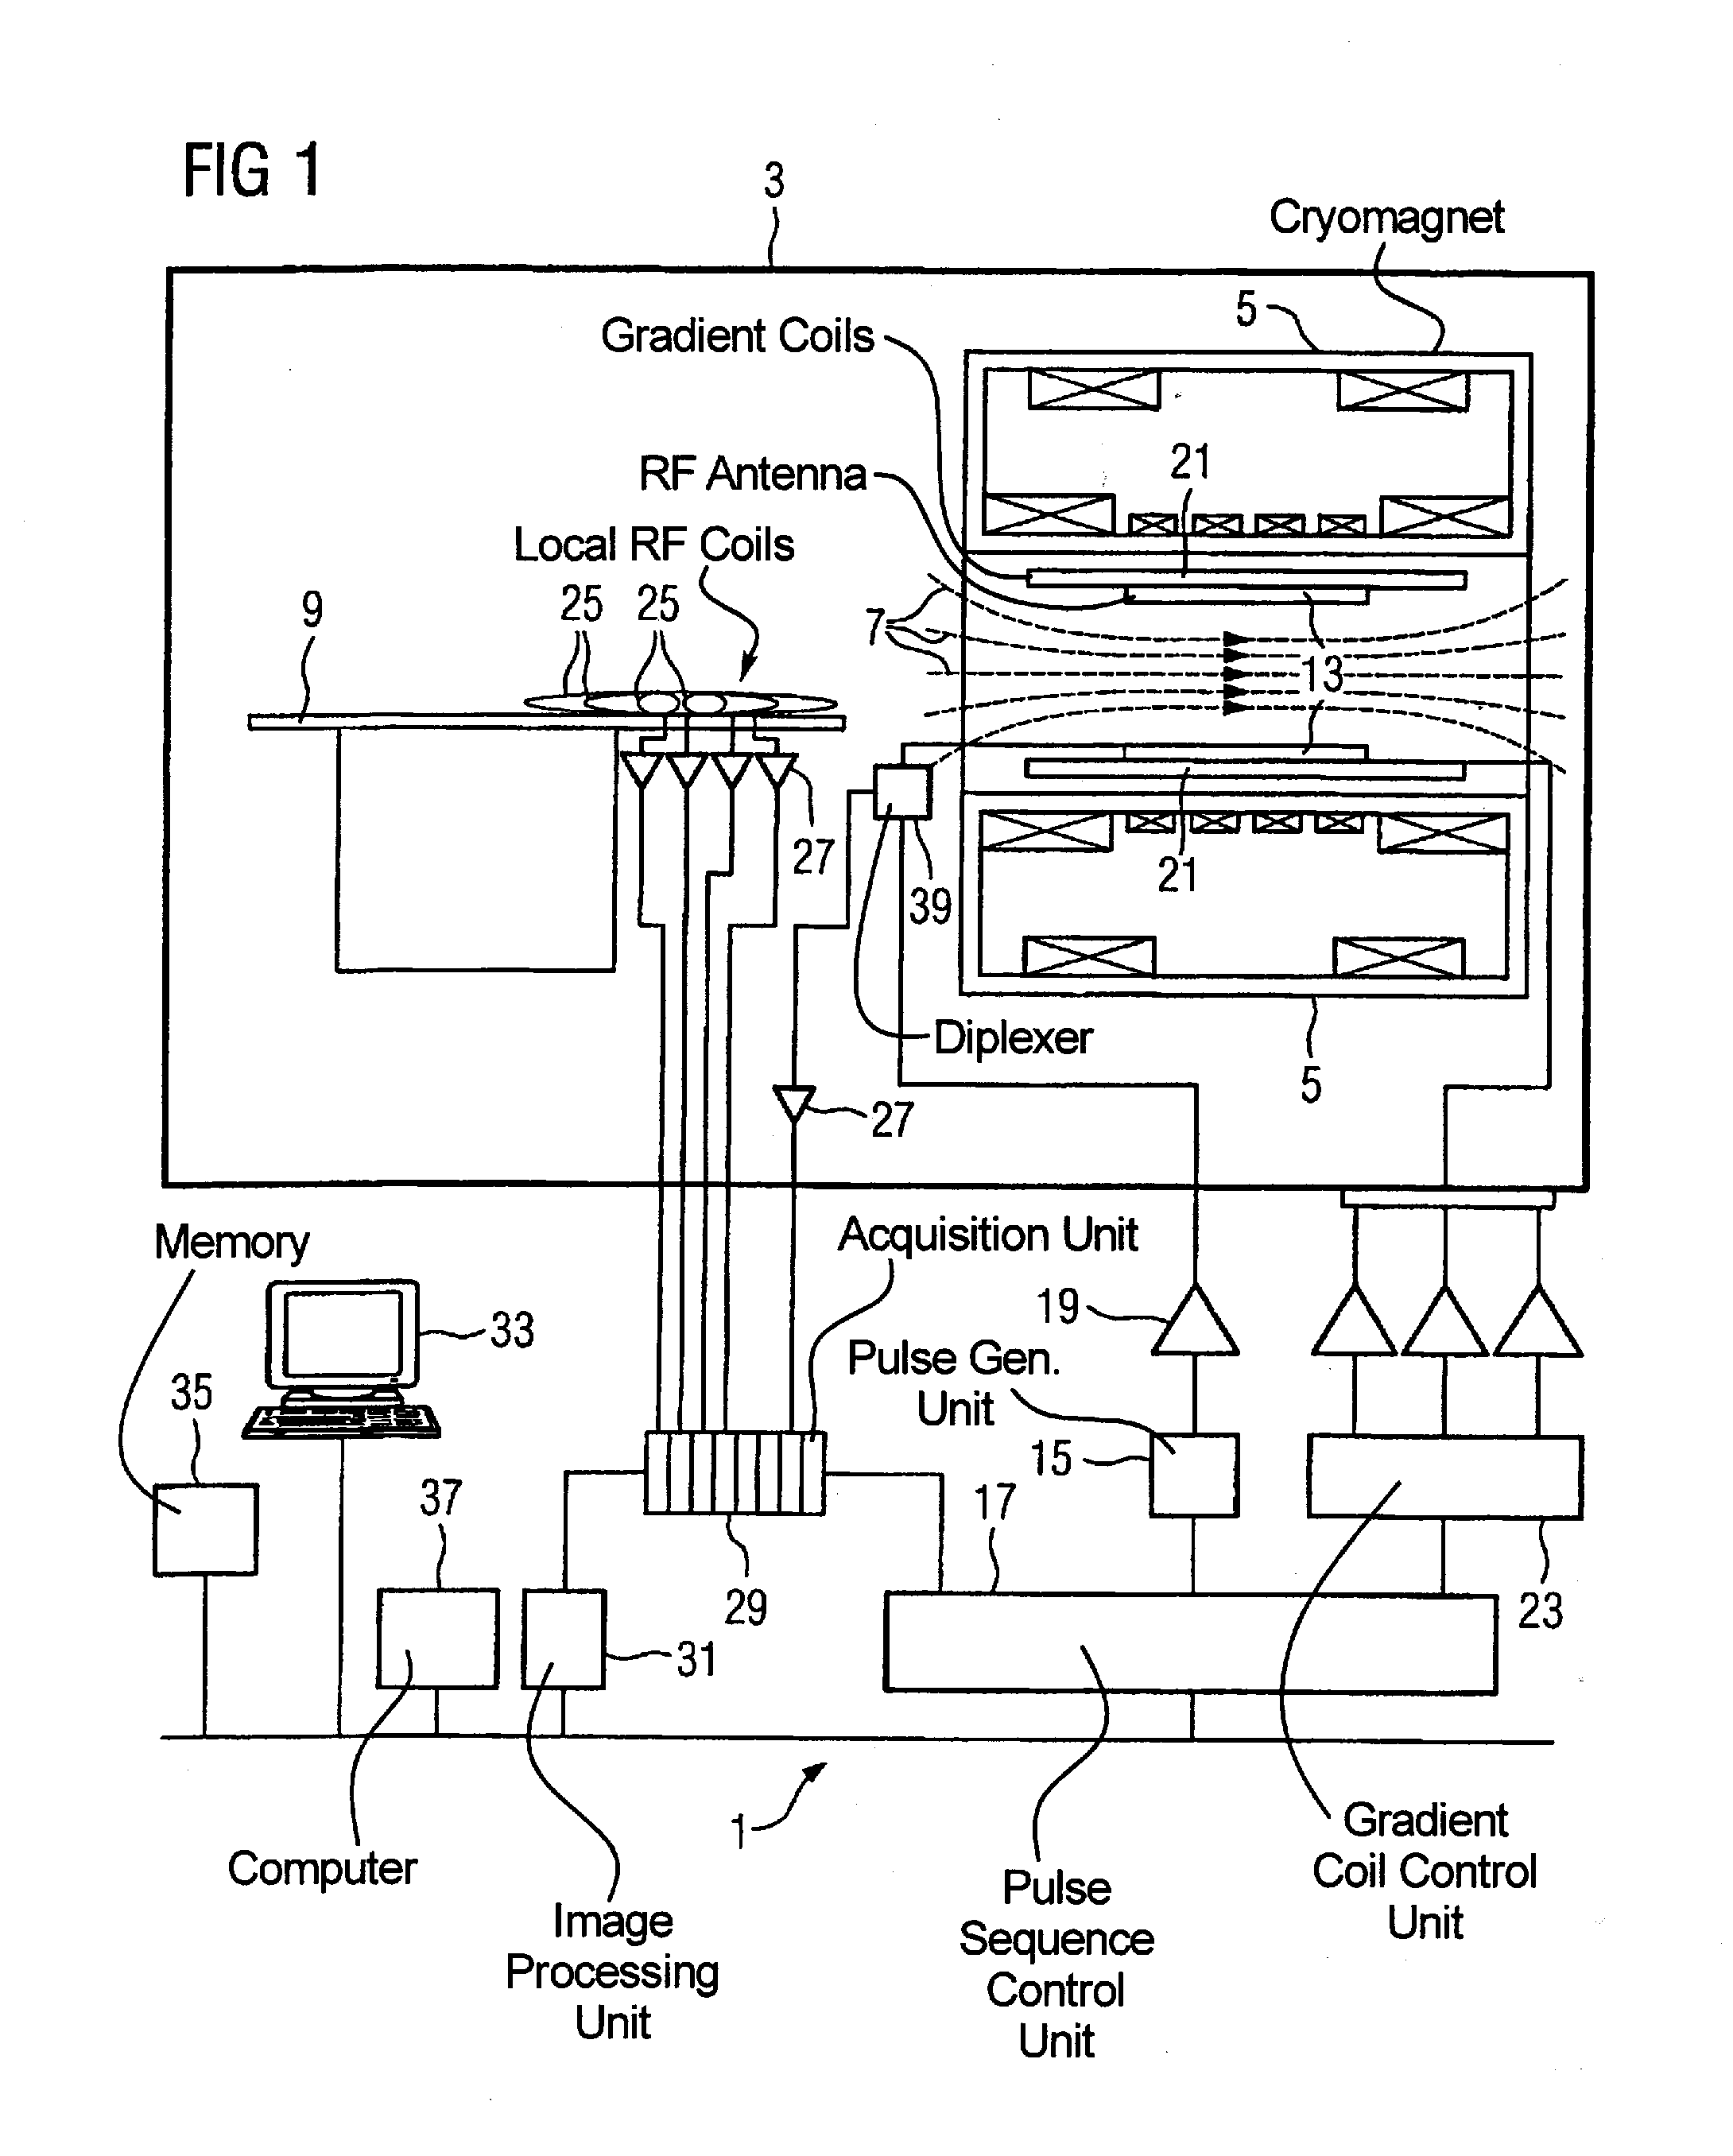 Magnetic resonance method and apparatus for generating a perfusion image